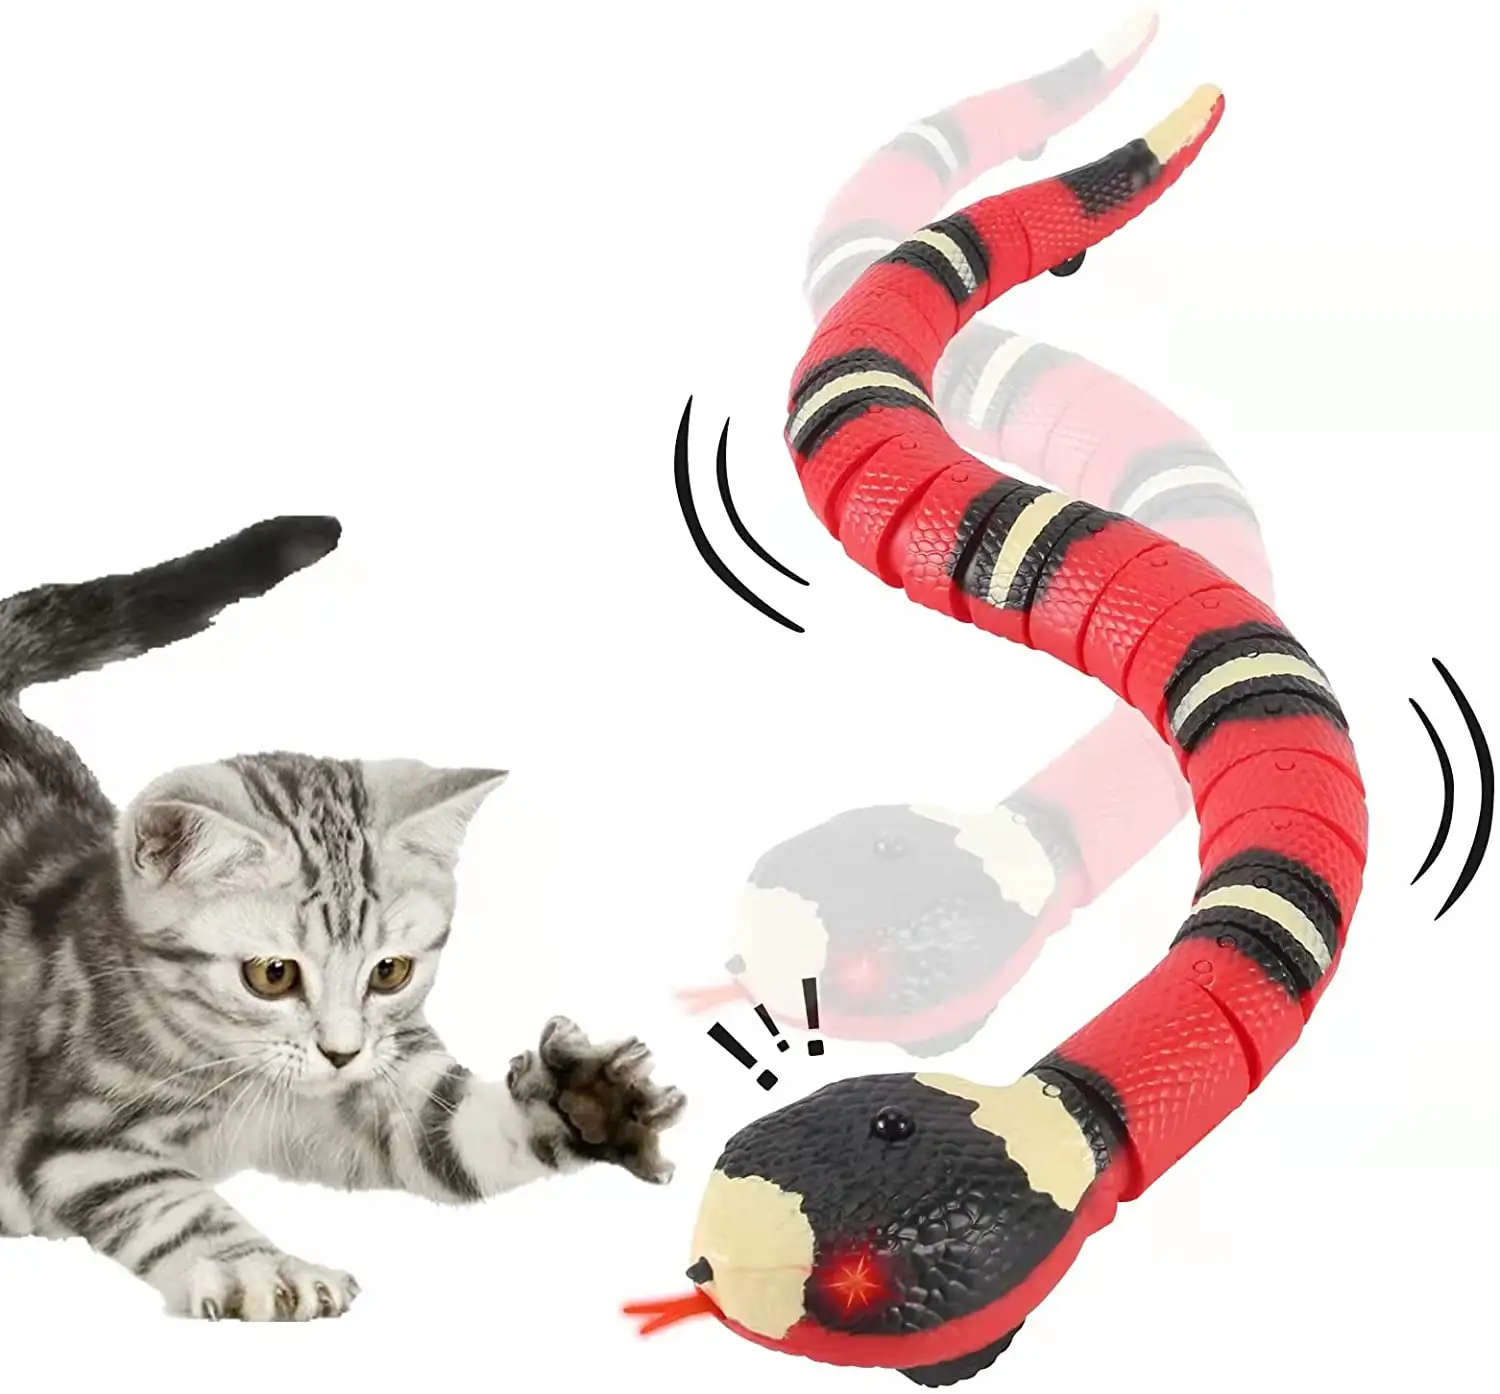 Electric Snake Toy, Cat Interactive USB Realistic Smart Sensing Snake Toy, Tricky Snake Cat Toy